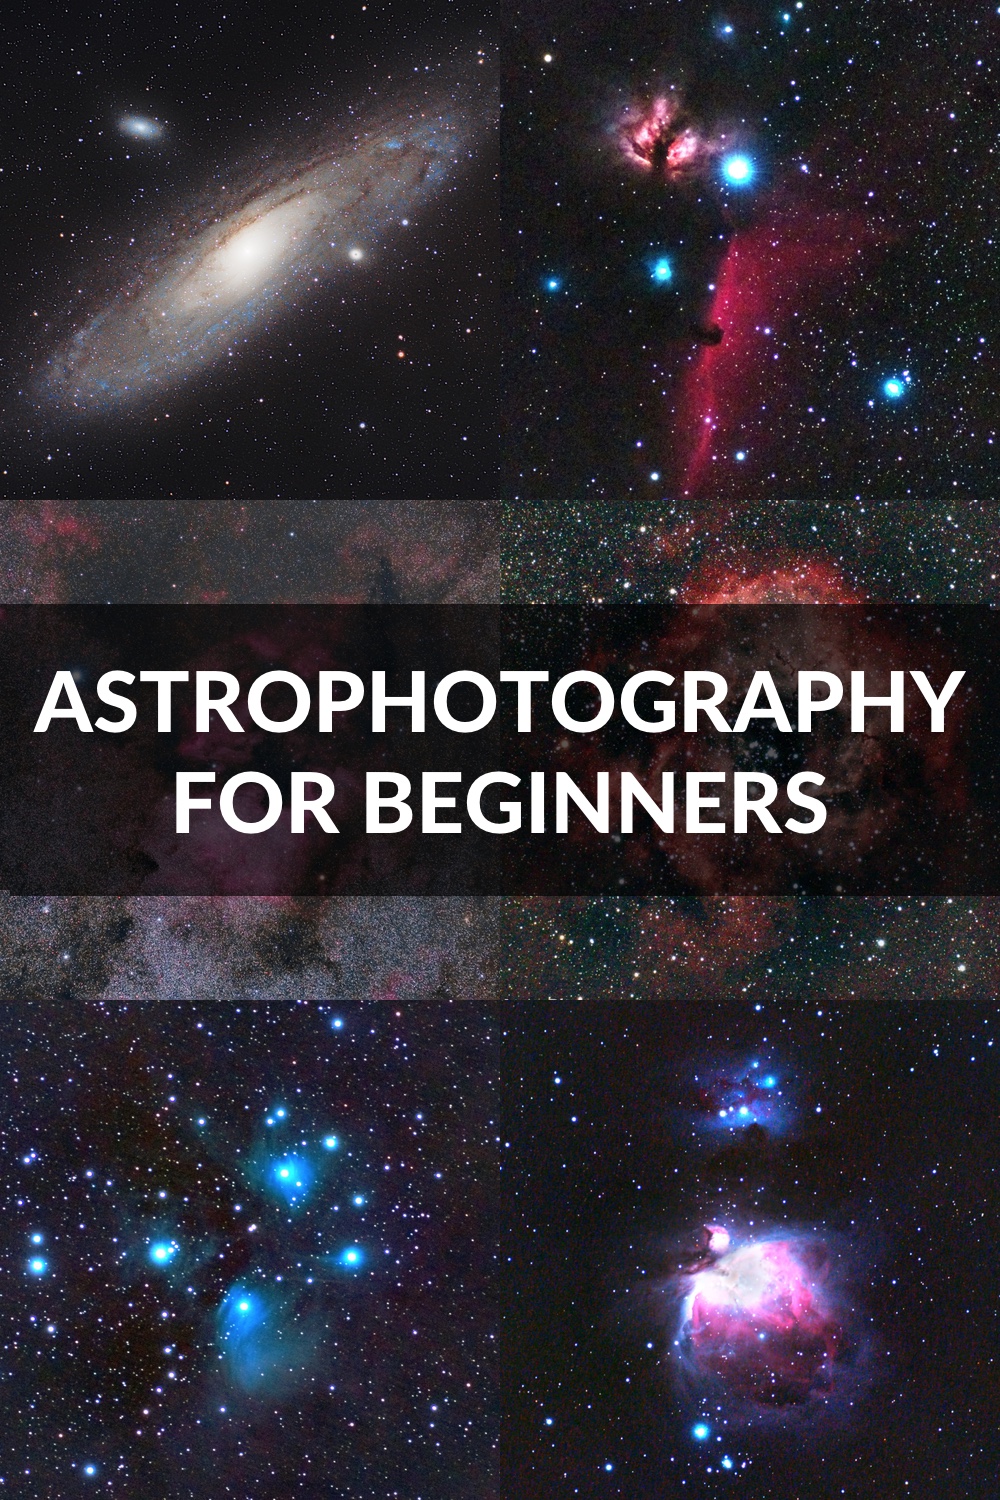 Astrophotography for Beginners Guide